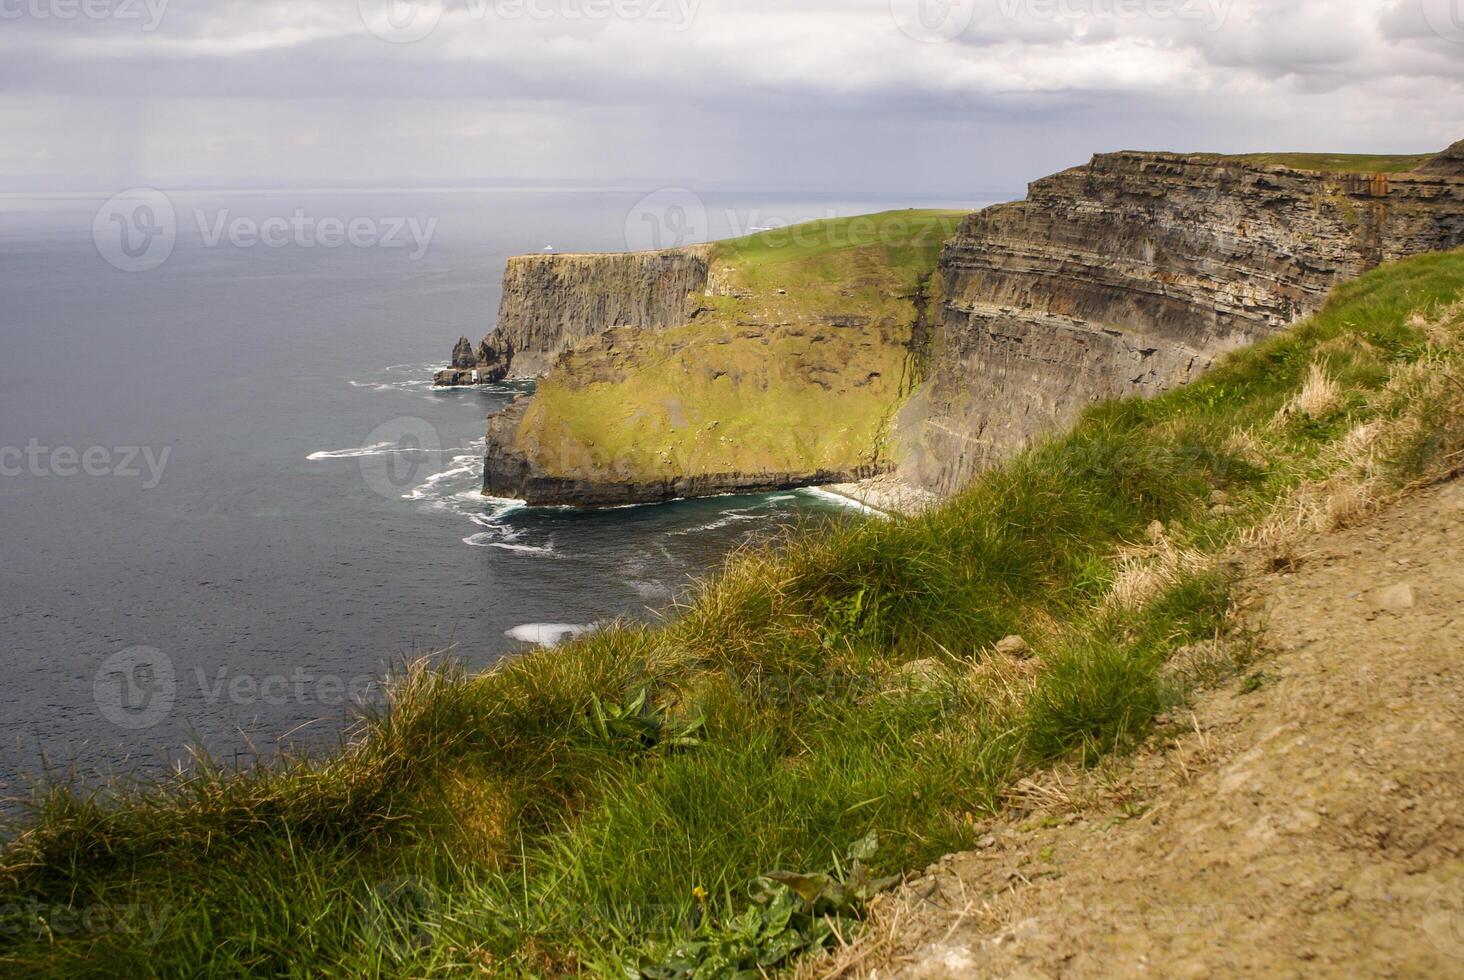 Cliffs of Moher i County Clare, Irland foto